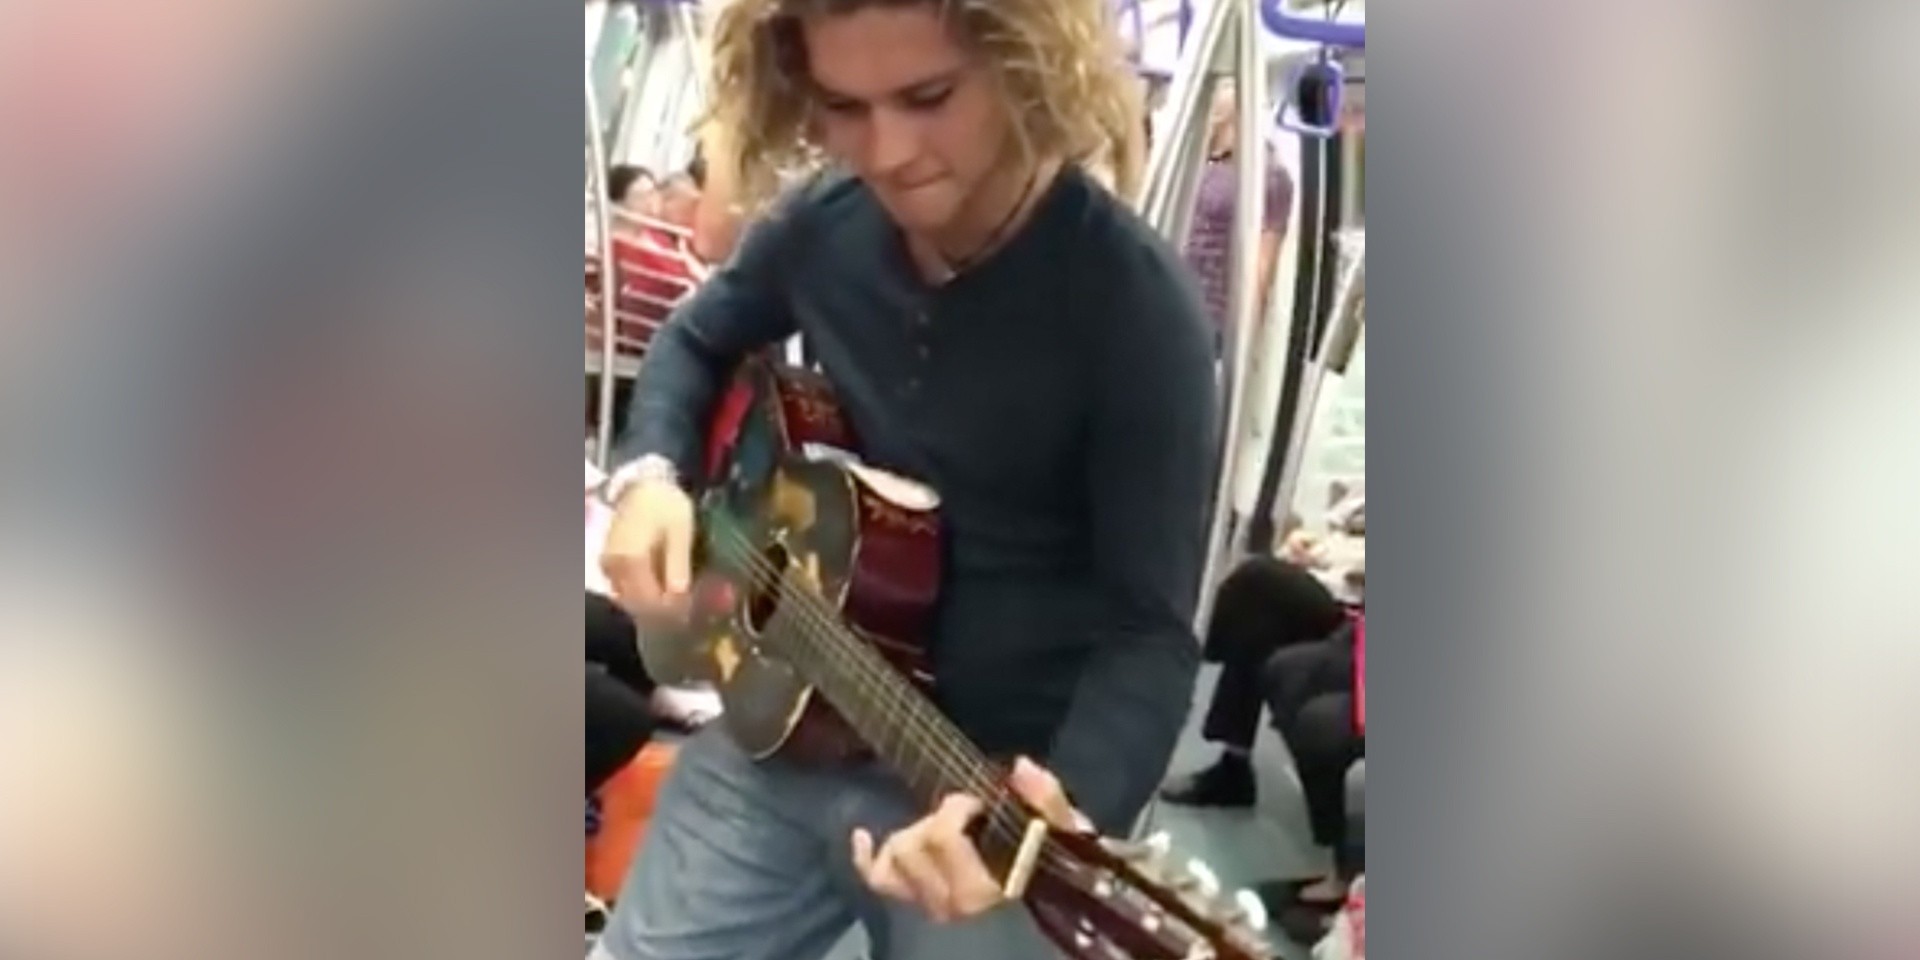 WATCH: A guy performs 'Wonderwall' in an MRT, and people join in instead of reporting to STOMP